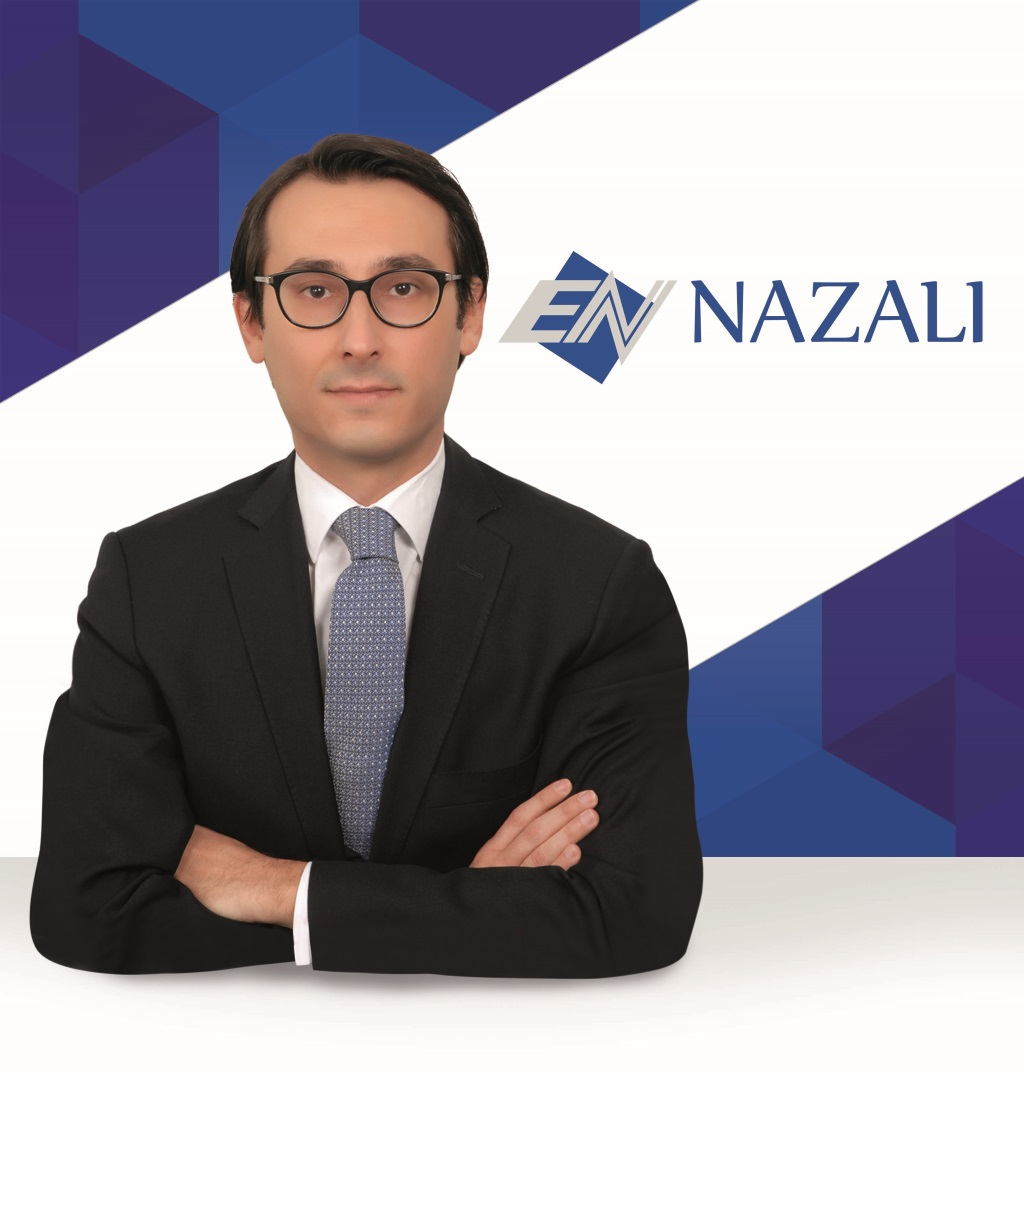 NAZALI has started to employ Fatih UZUN who is Former Customs Inspector and Customs Broker as a Customs and Foreign Trade Partner